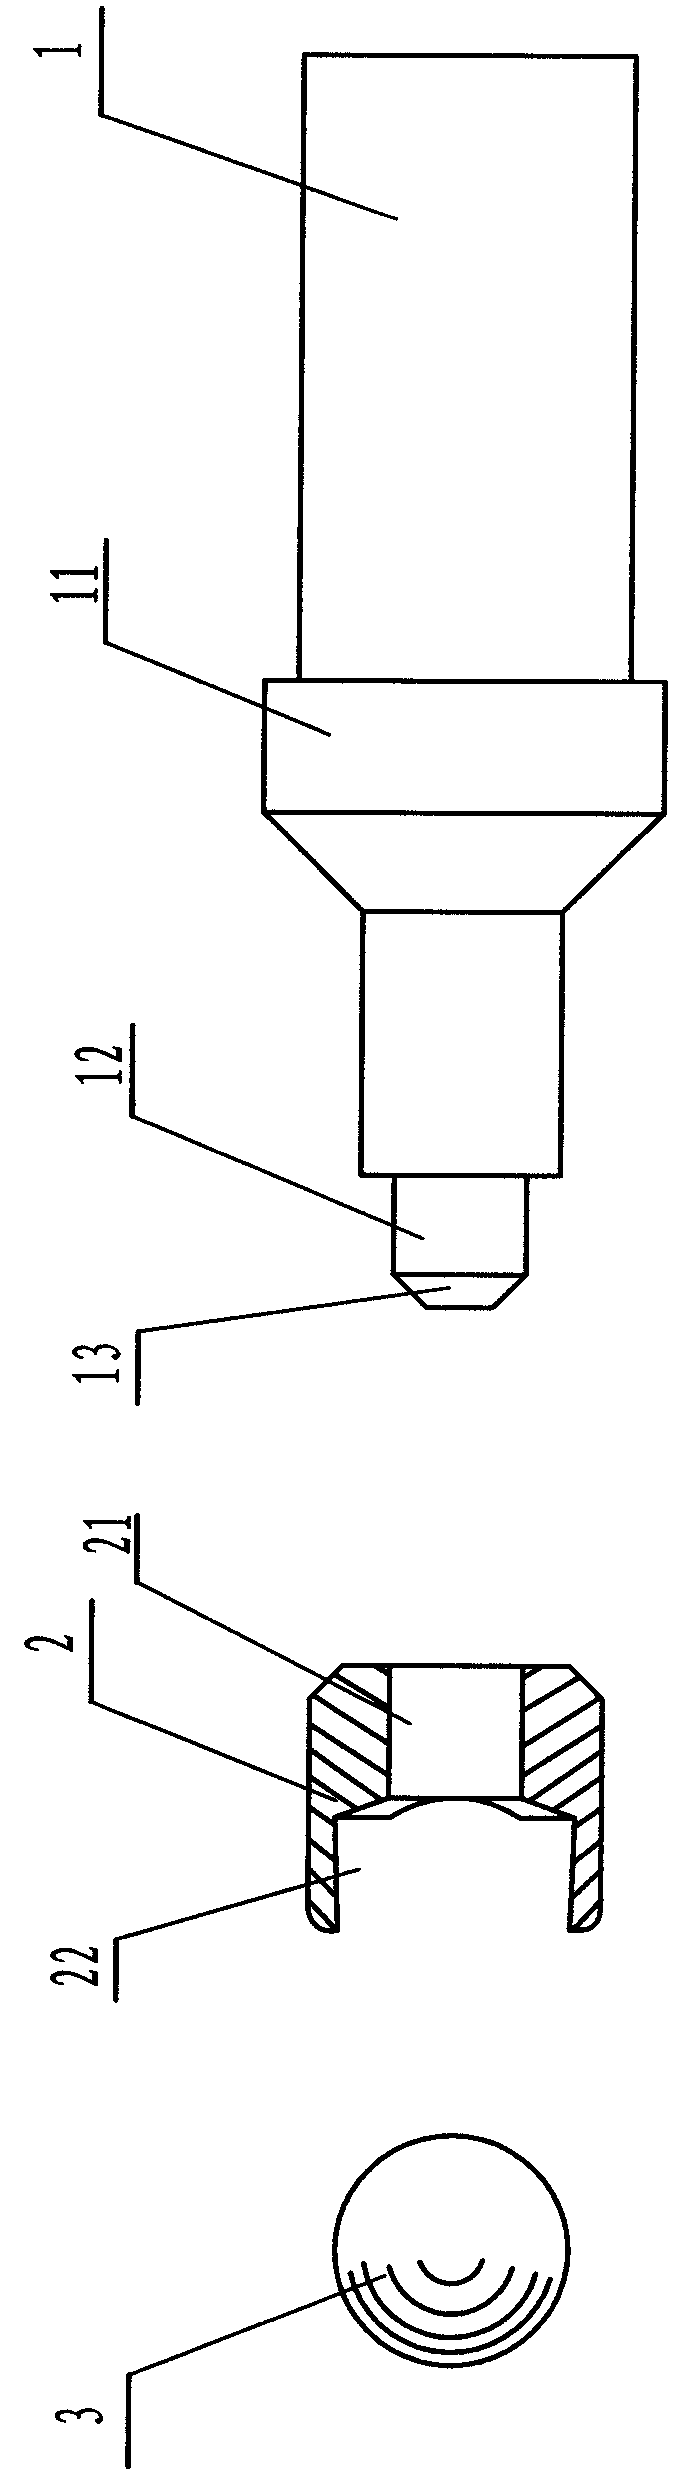 Main valve element of precise pressure reducing valve and production technology